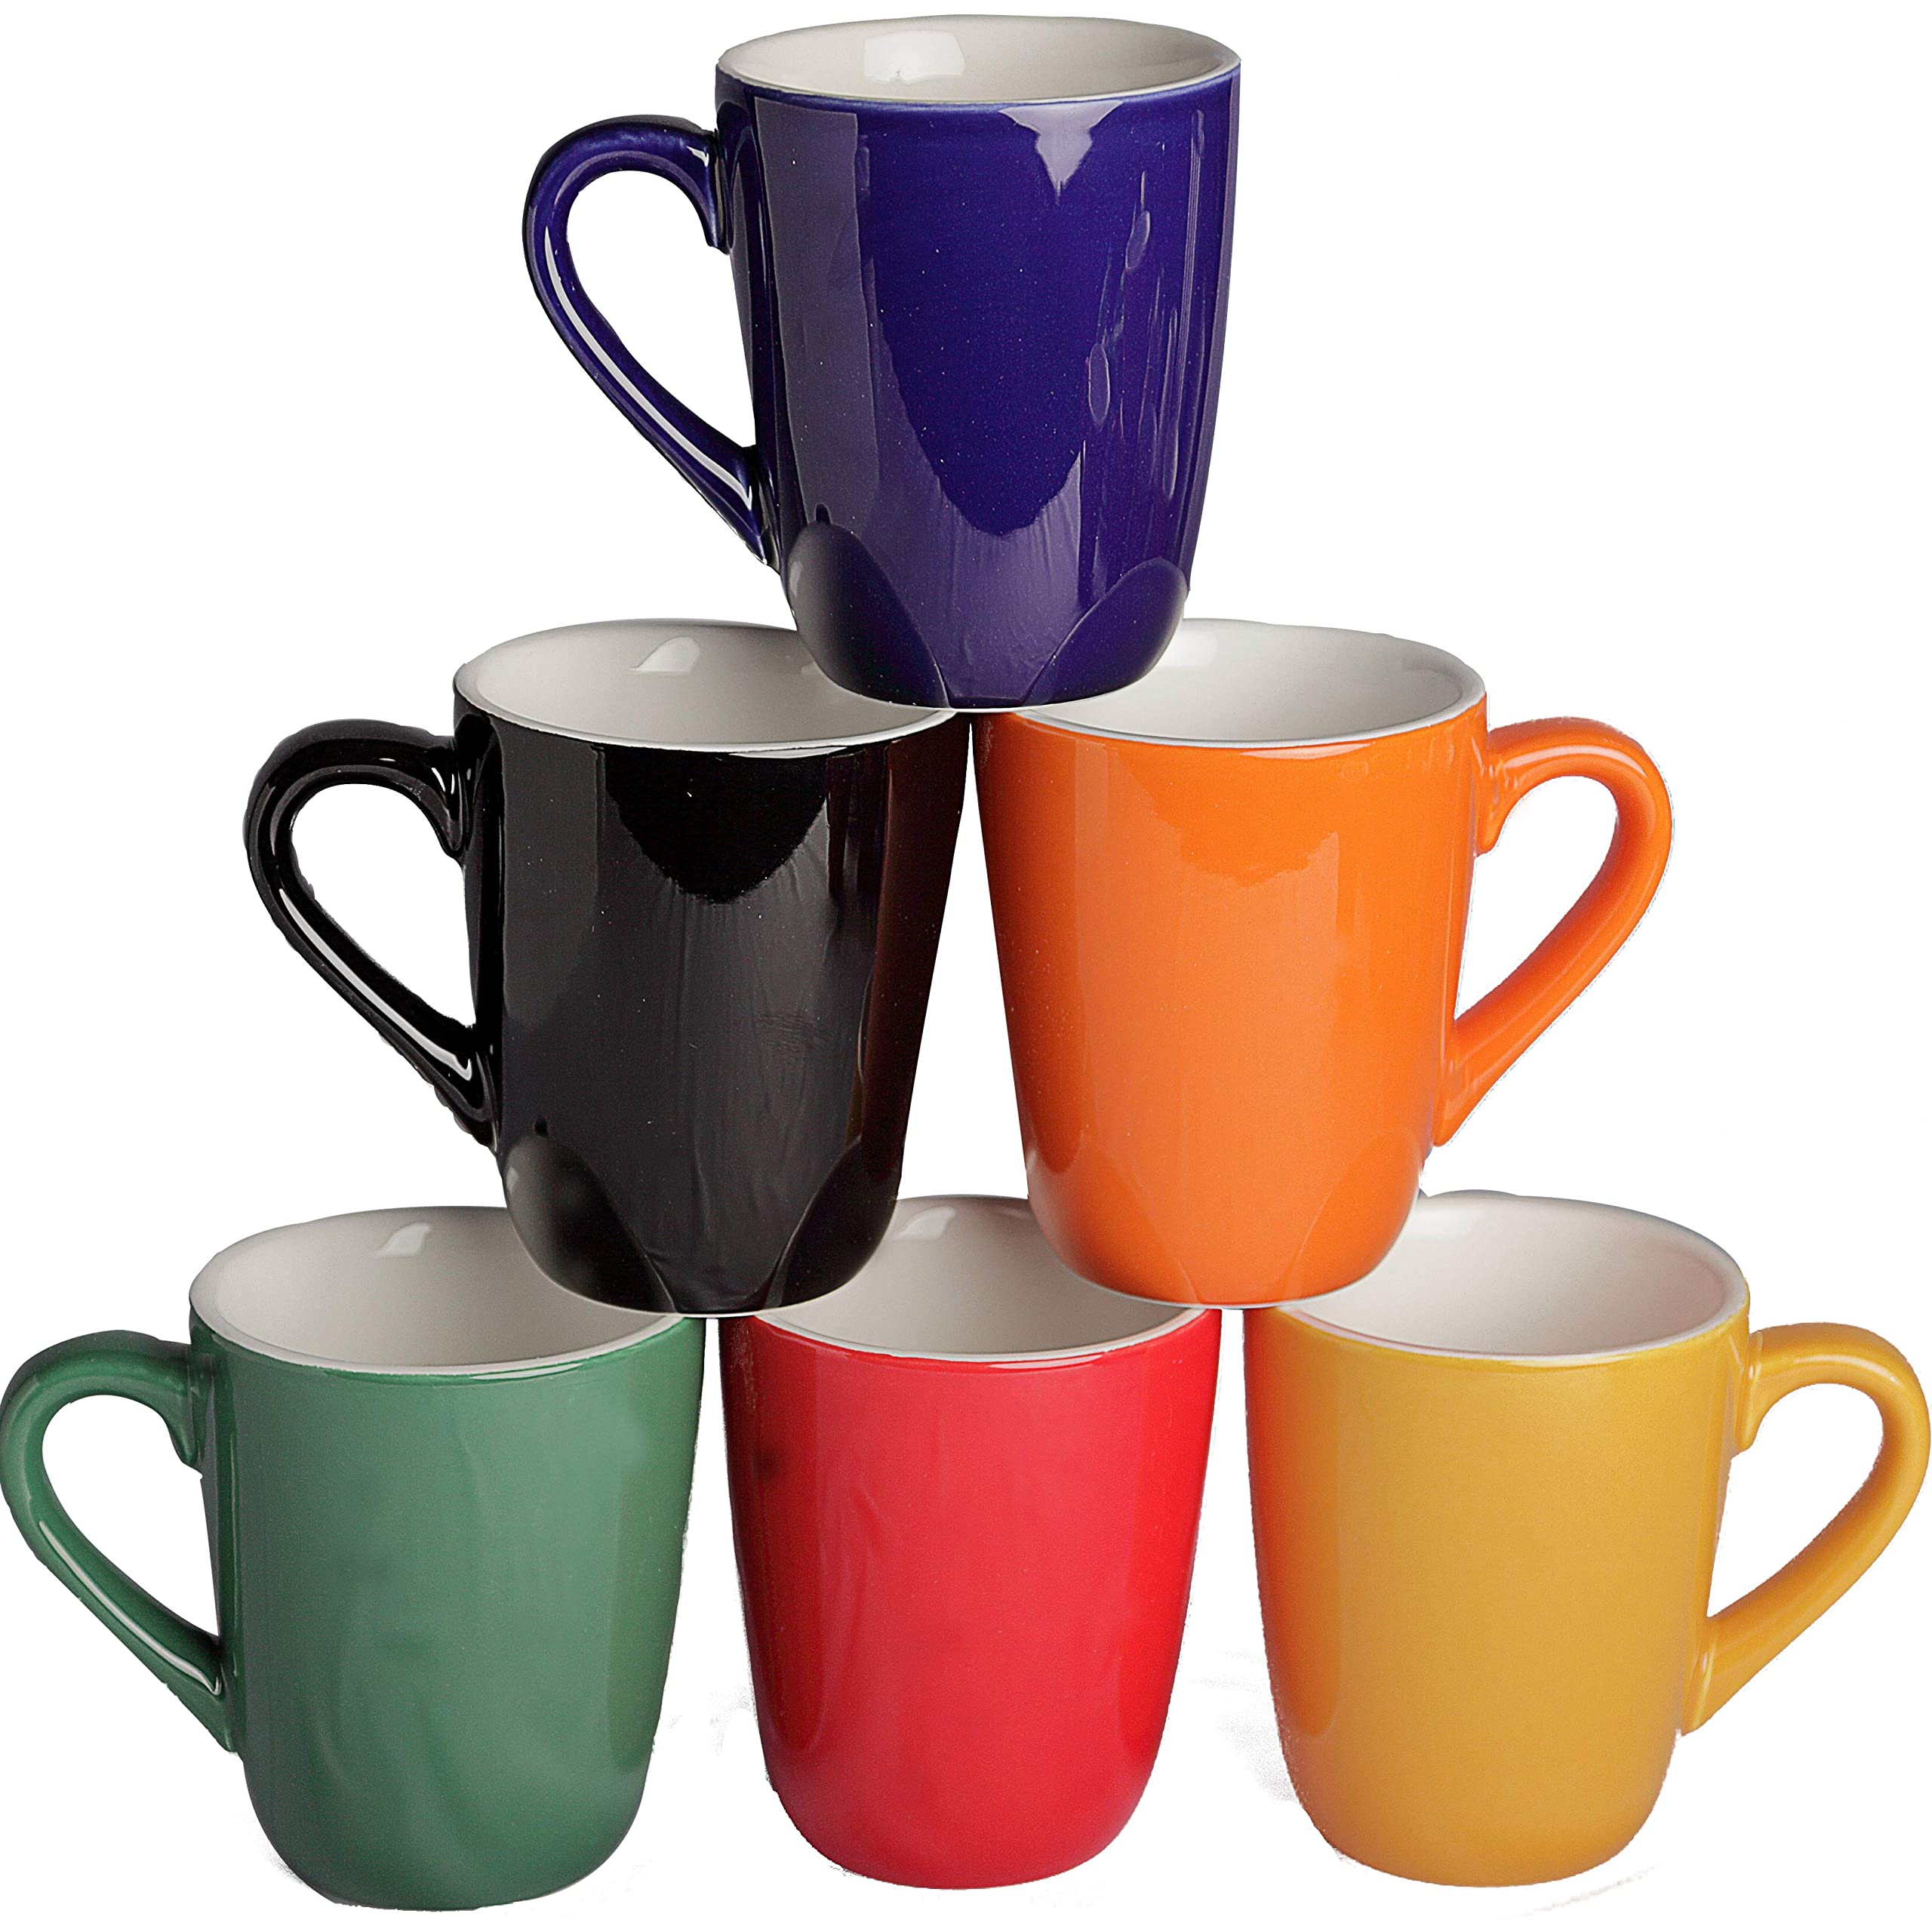 grand escompte superyes Large Ceramic Mugs-Sets of 6 for Cappuccino Latte, 16oz(500ml) Barrel Tulip Shape, Easy-Grip Handle, Dishwasher, Microwave Safe, Solid Red/Yellow/Blue/Green/Orange/Black Glazed xKixNIHPh en vente